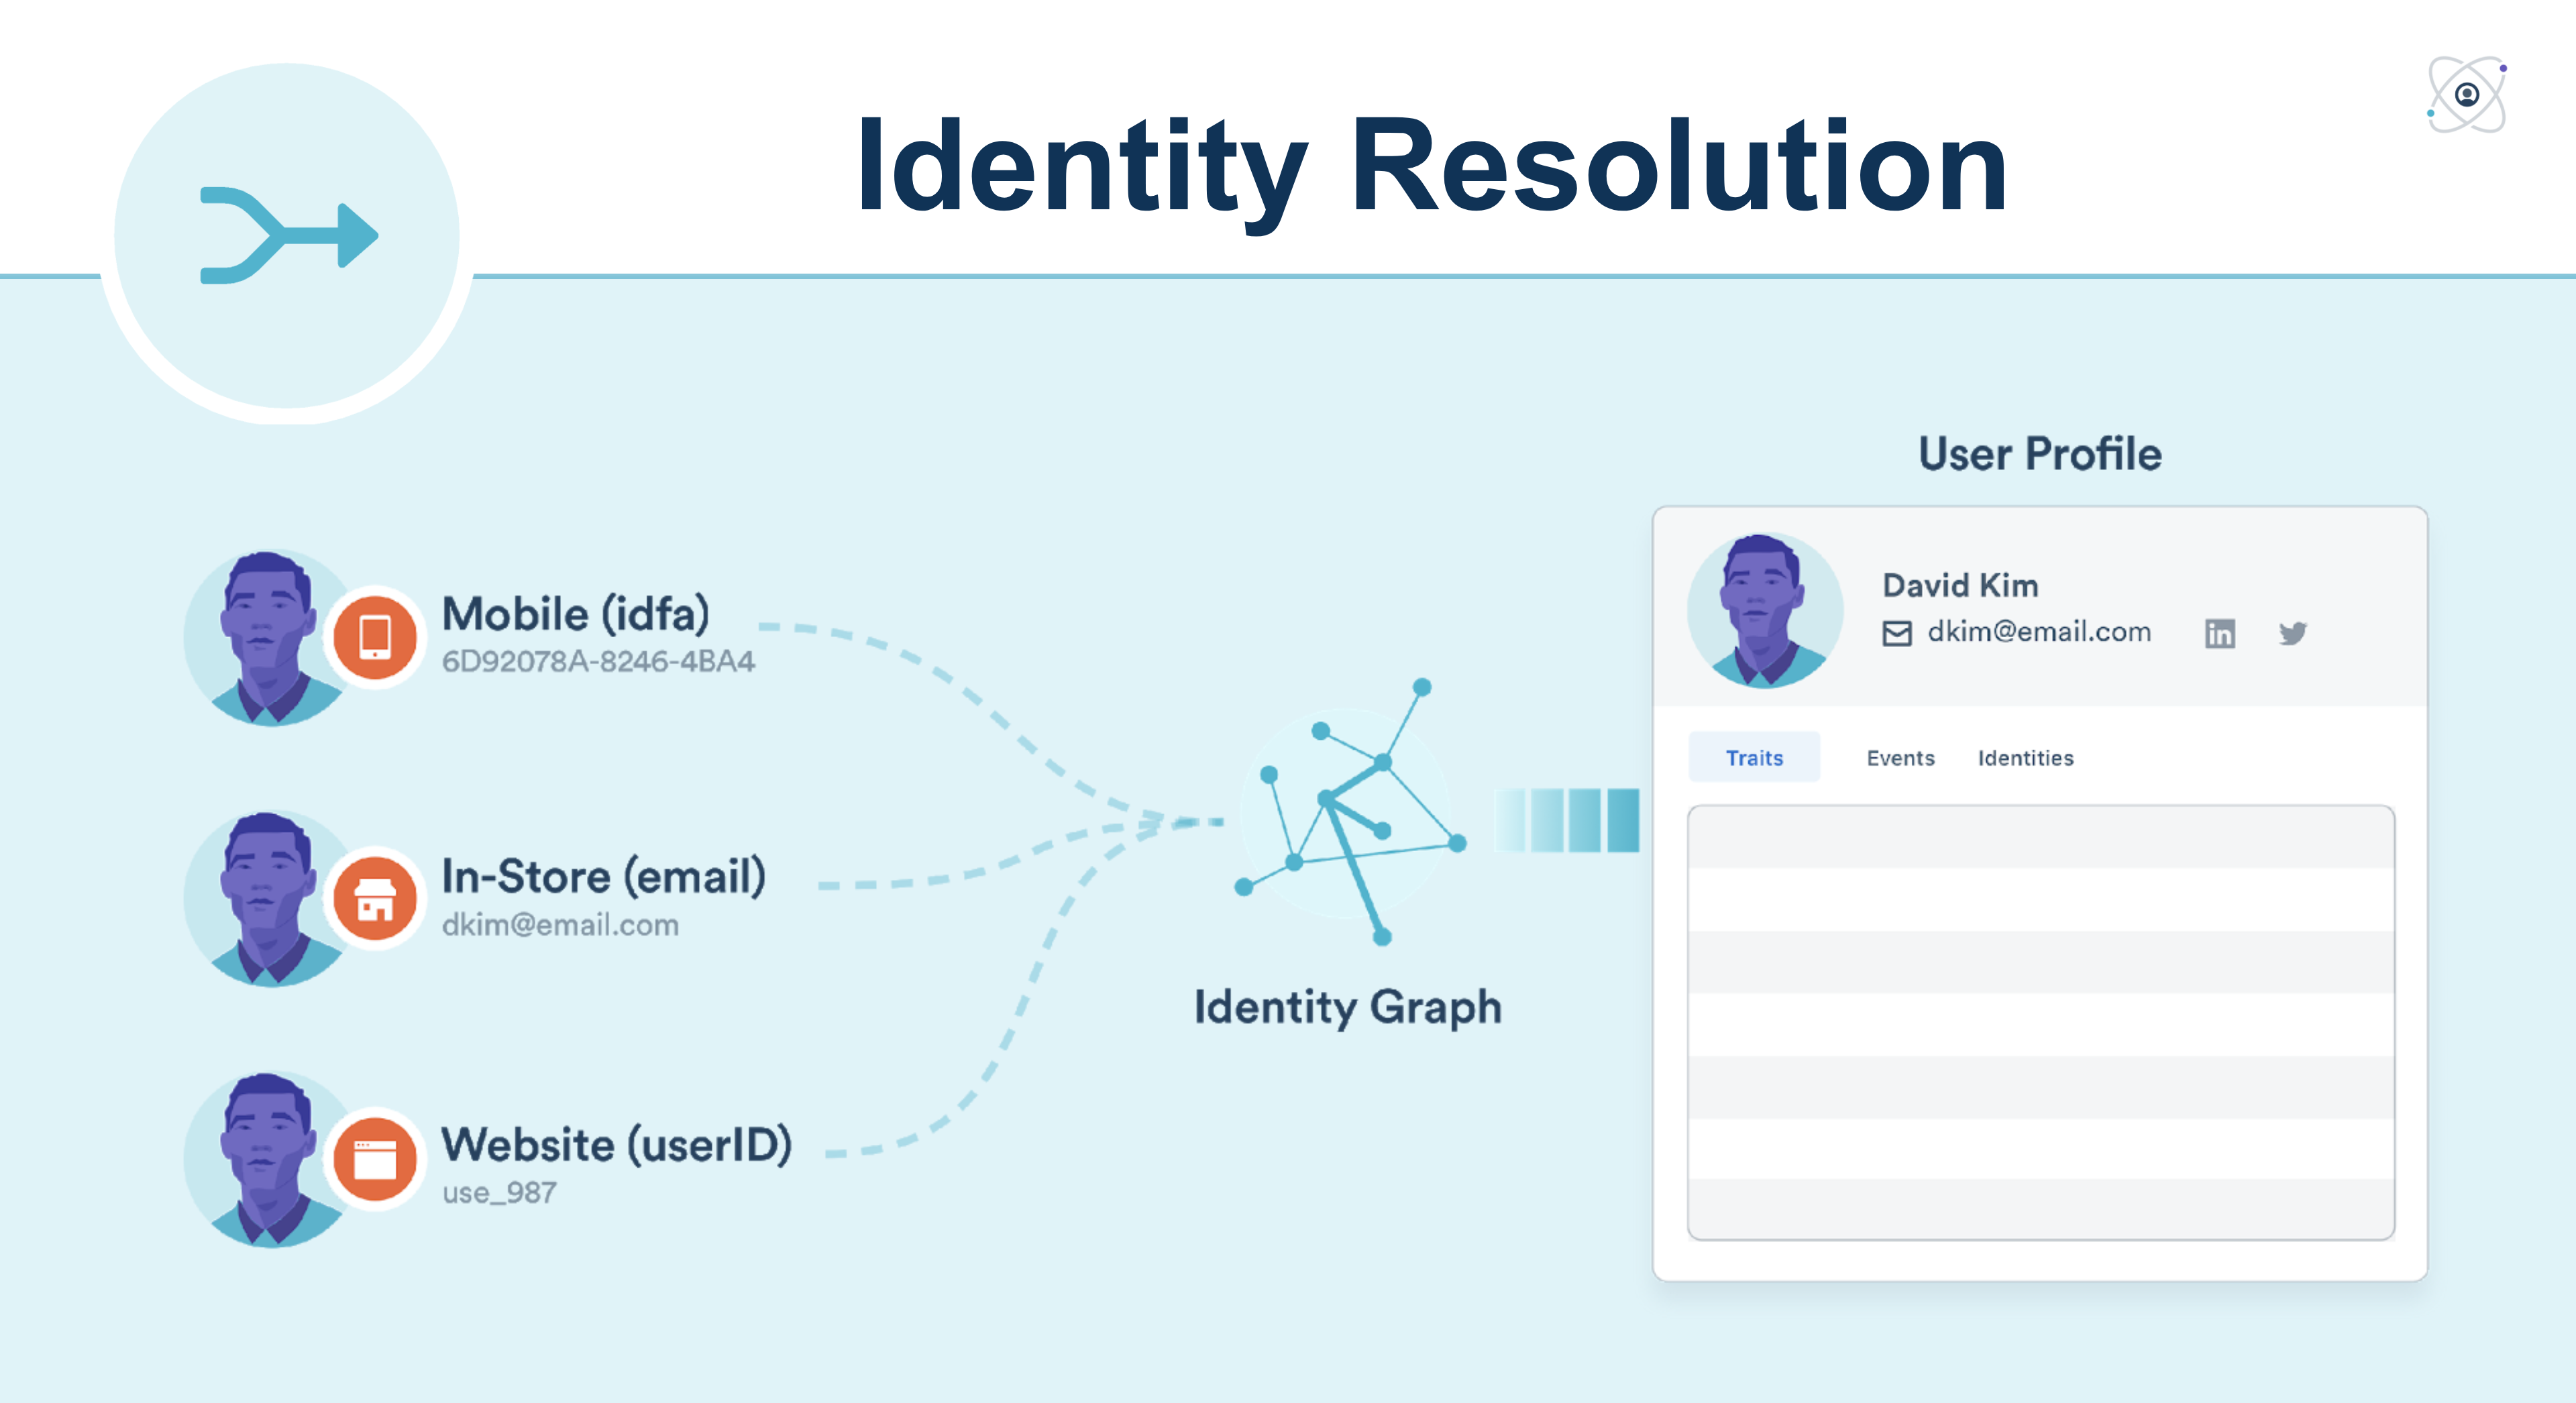 The Identity Graph merges the complete history of each user into a single profile